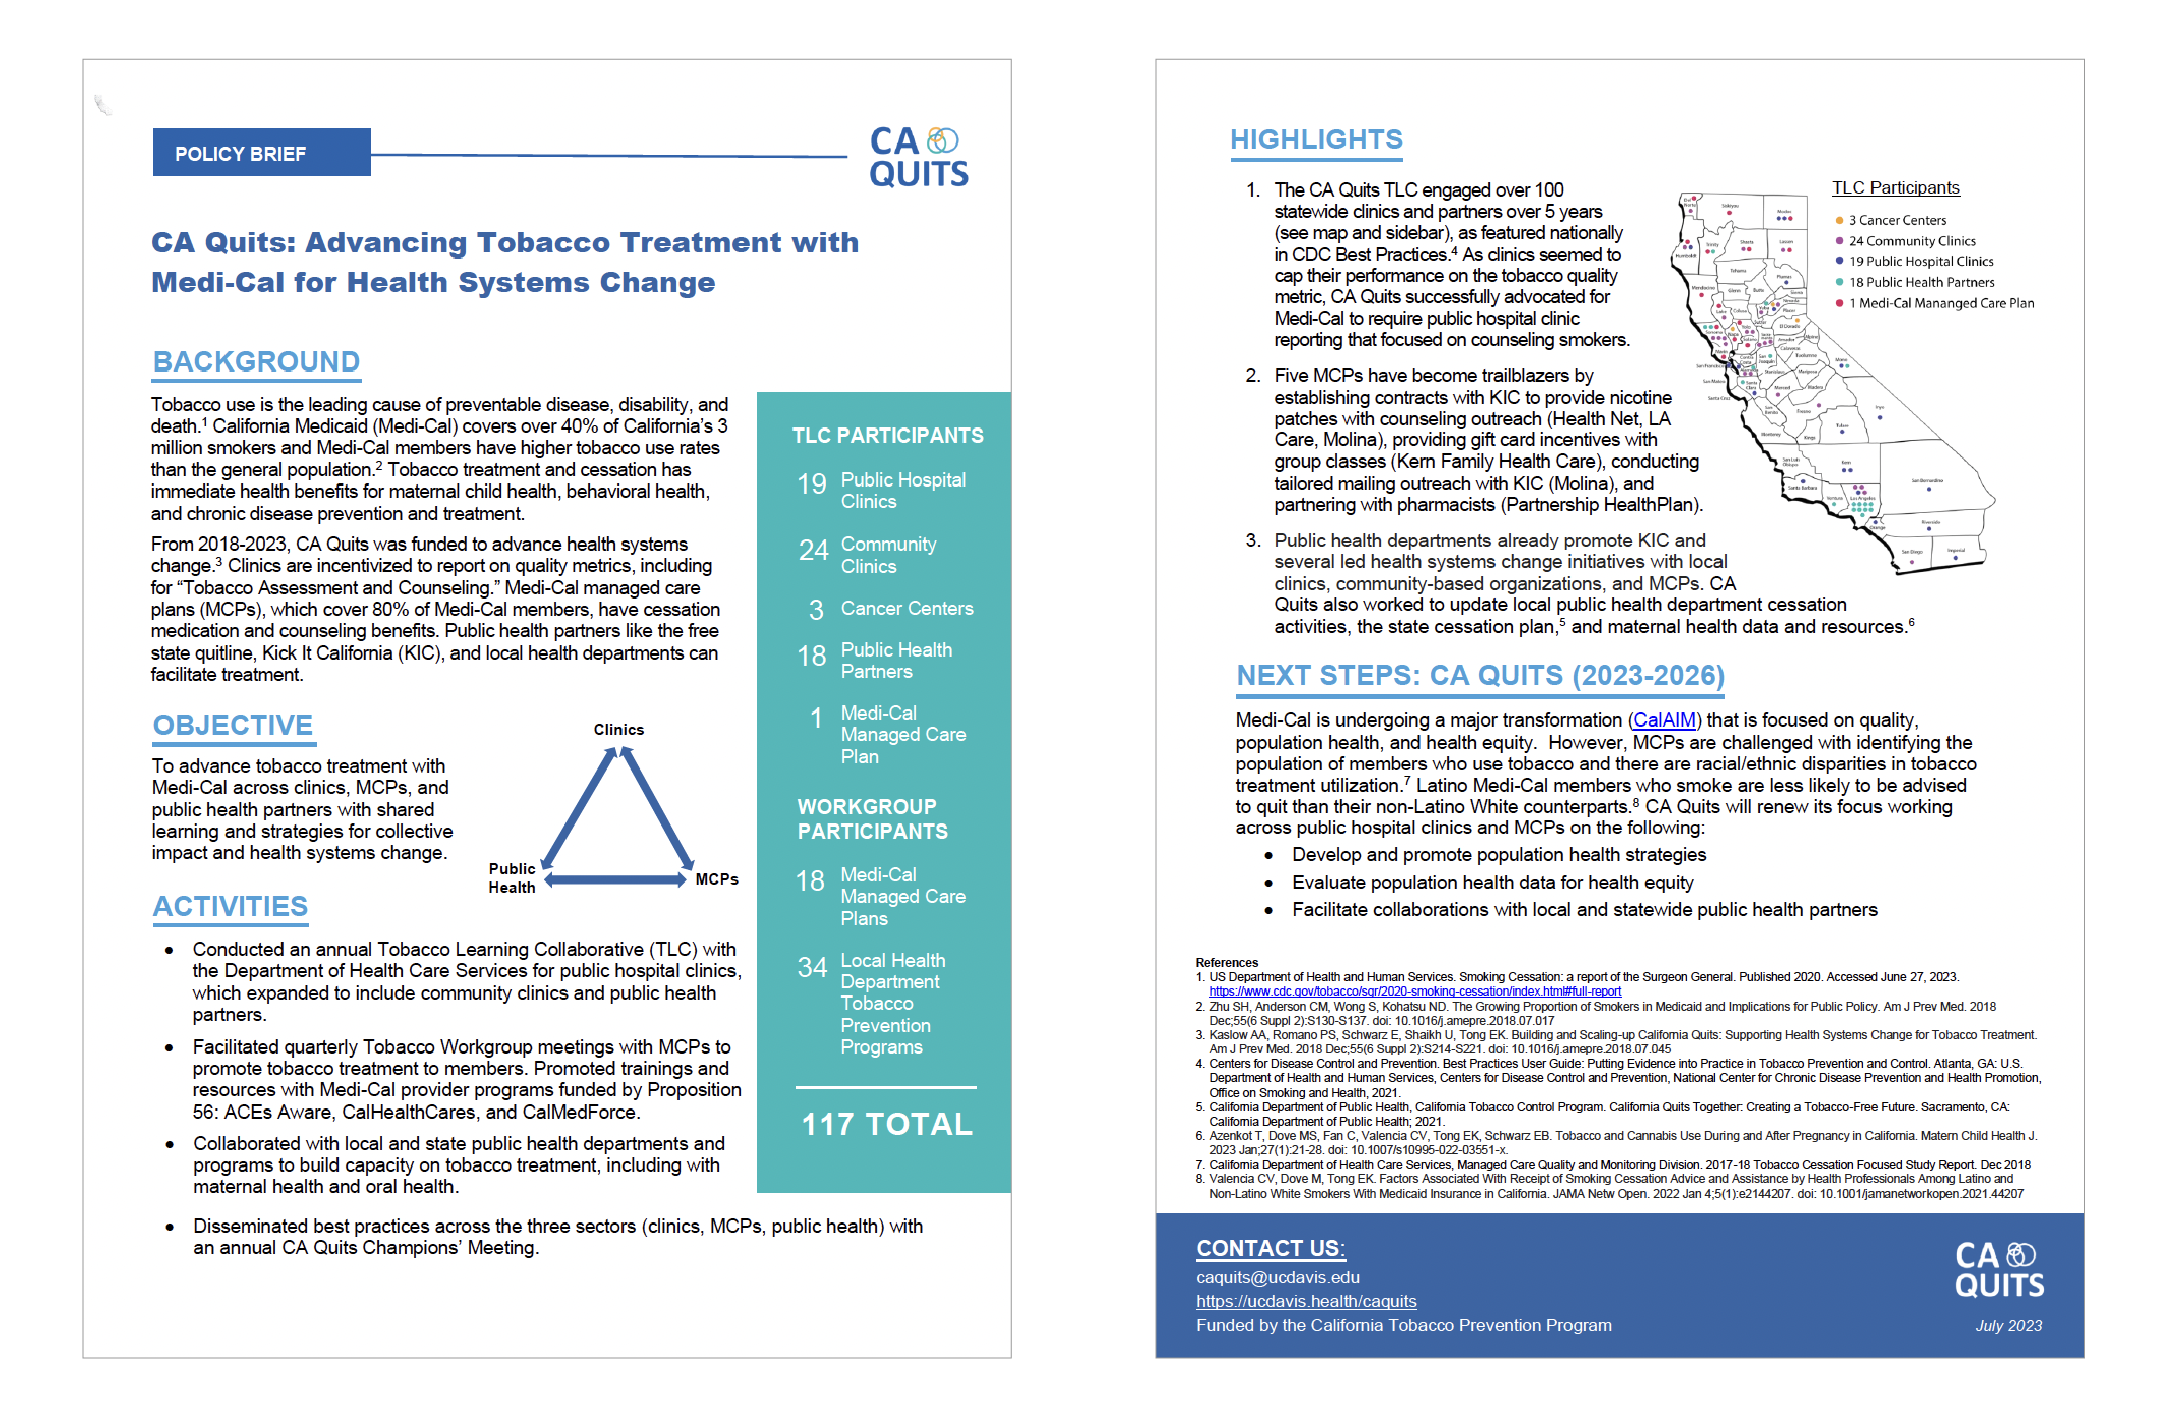 A side-by-side view of the CA Quits policy brief 2023